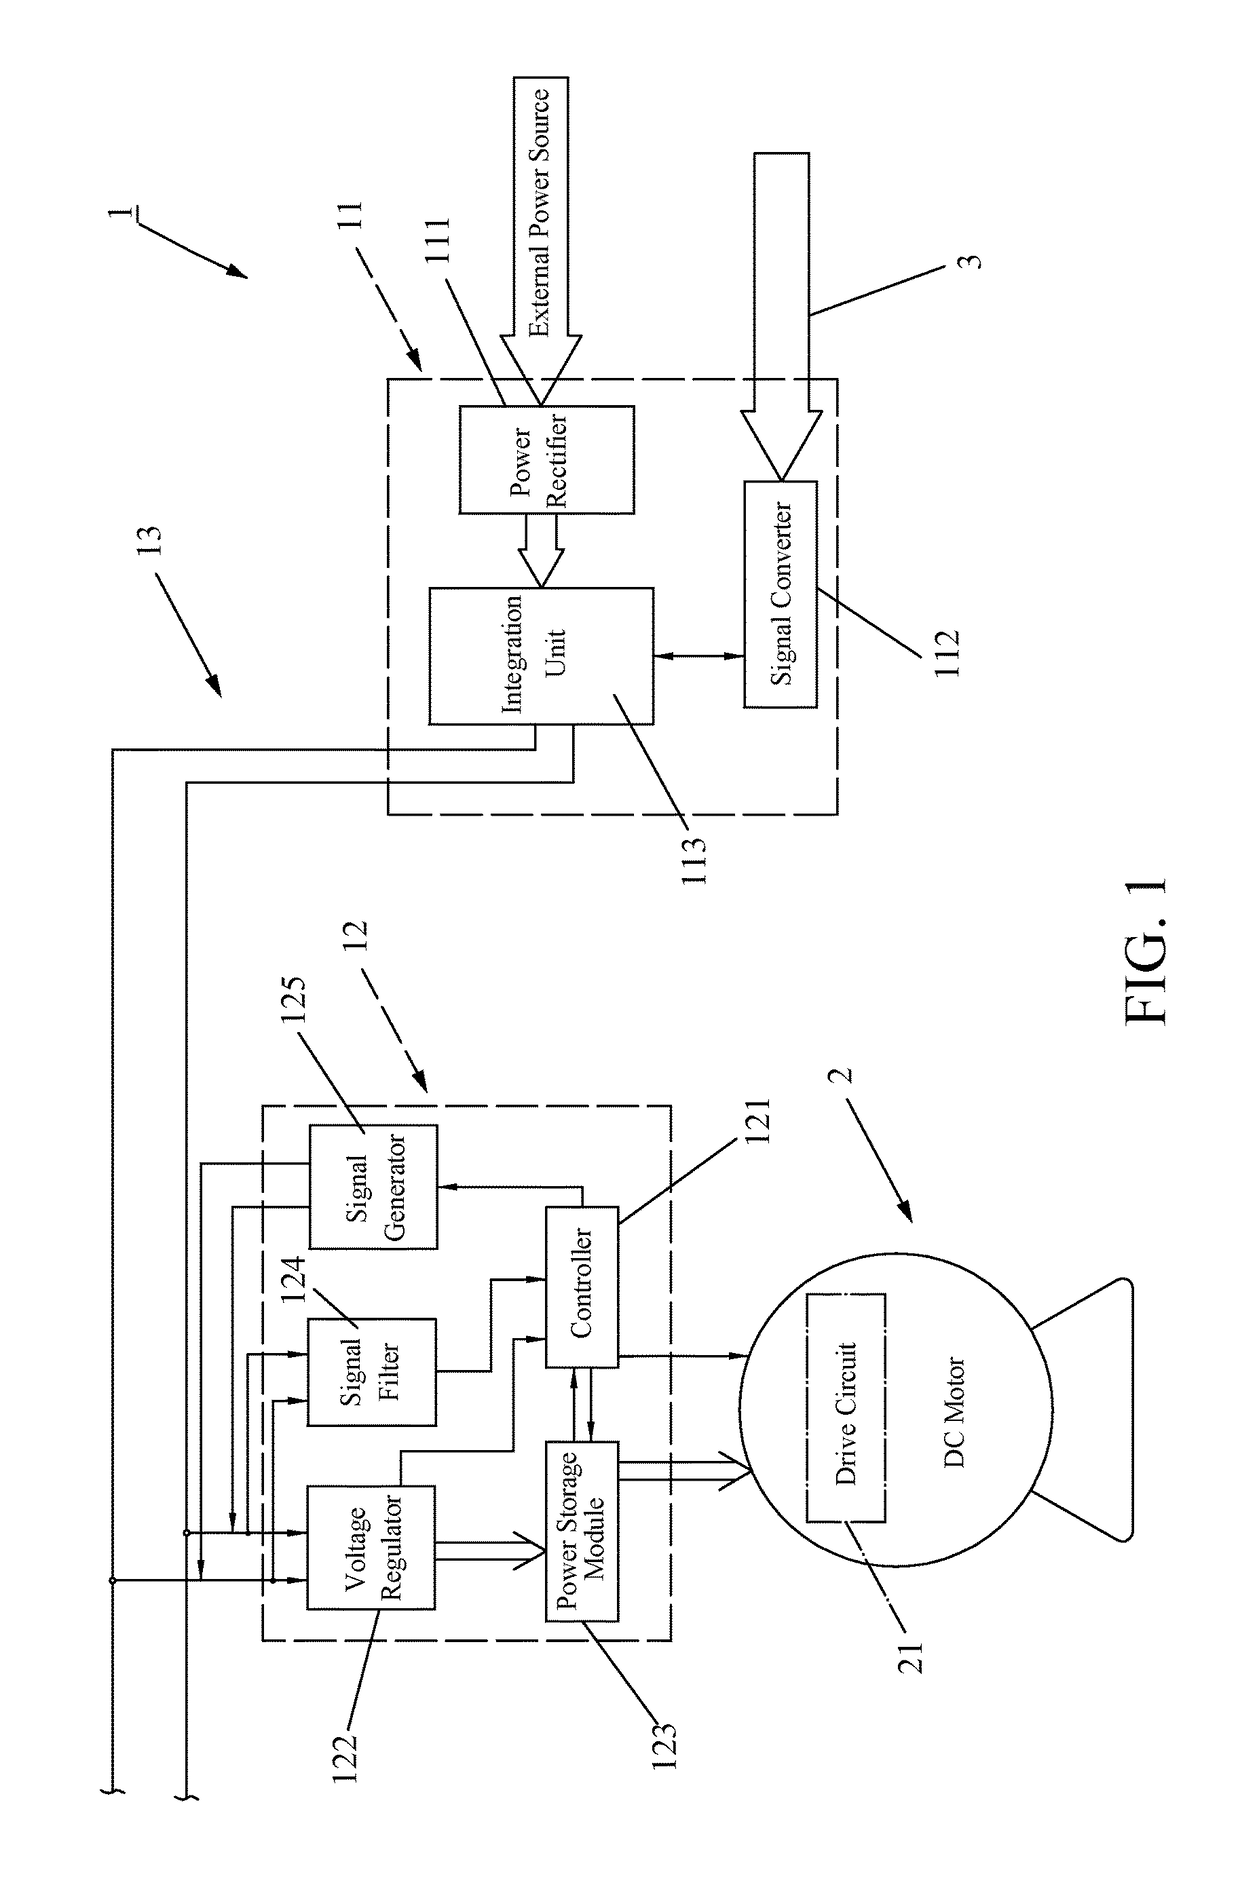 Electrical serially-connected control system